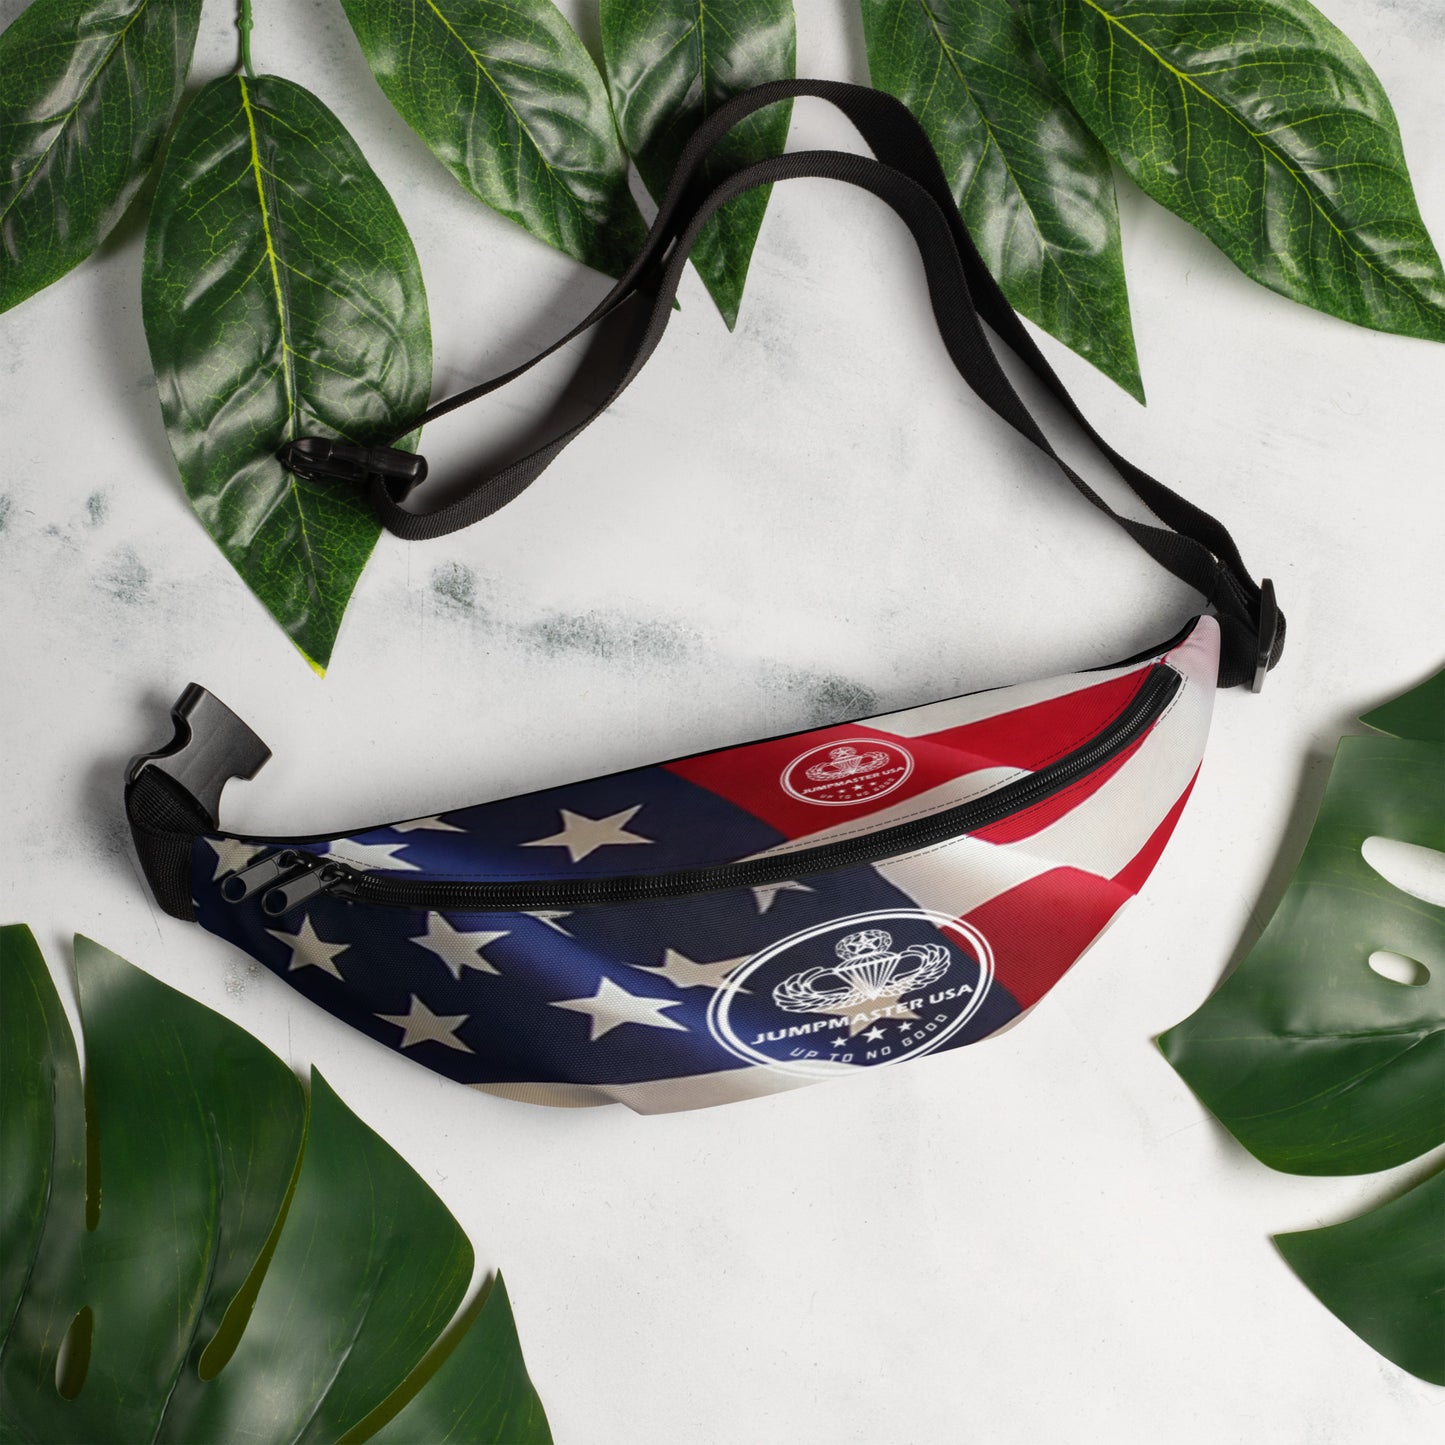 This Fanny pack is the ultimate accessory for stylish Jumpmasters on the go. This waist bag has everything—the right size, a small inside pocket, and adjustable straps—to become your favorite fashion item if you're going to a festival, getting ready for a vacation, or just like to keep your hands free.